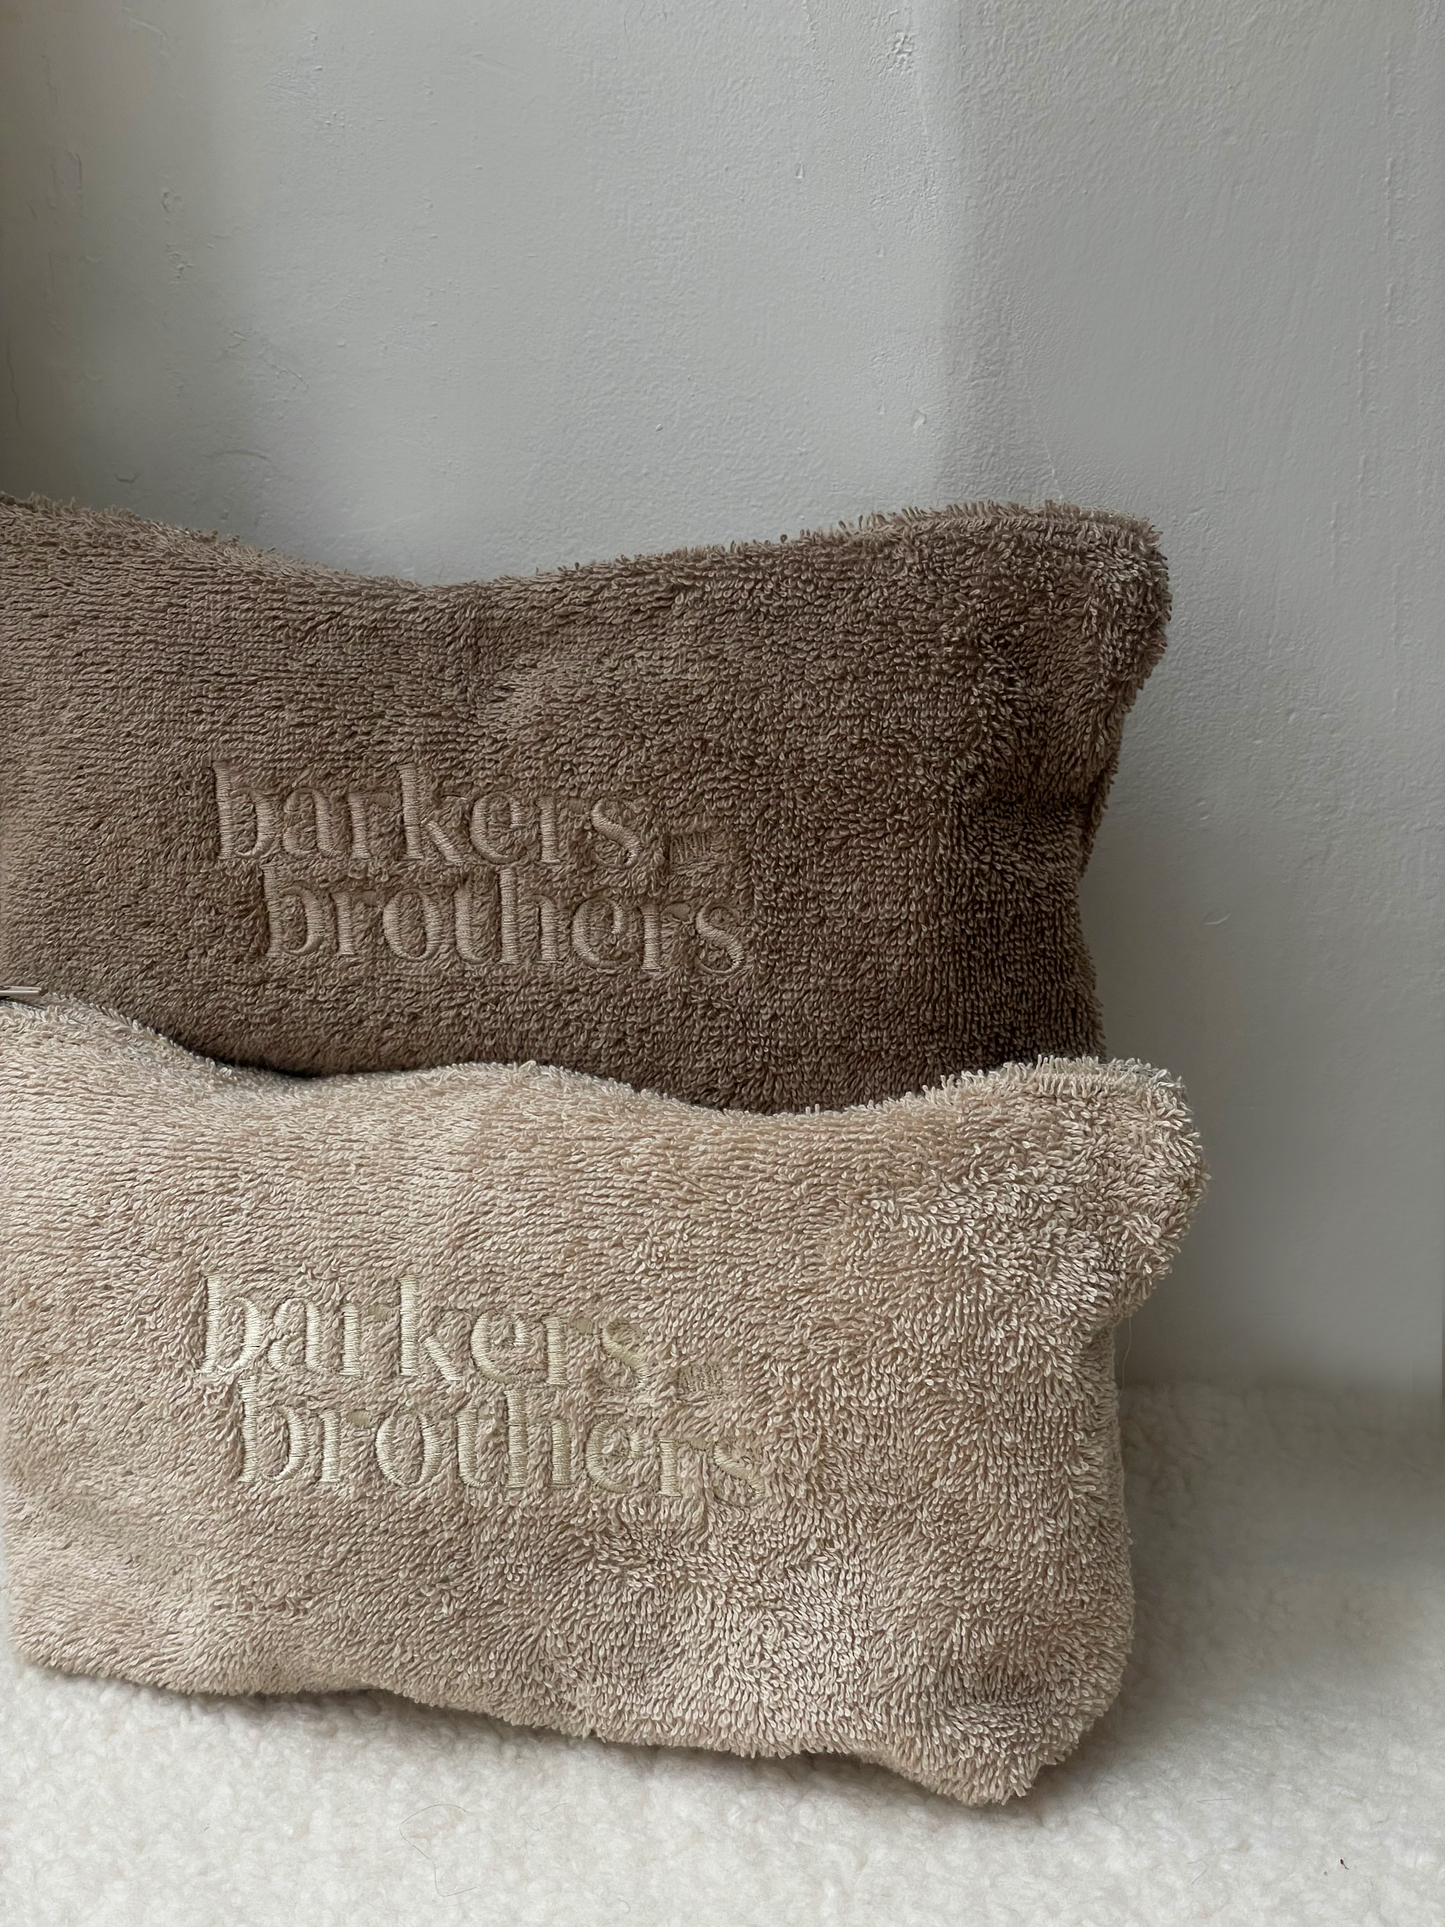 Pochette Barkers and Brothers